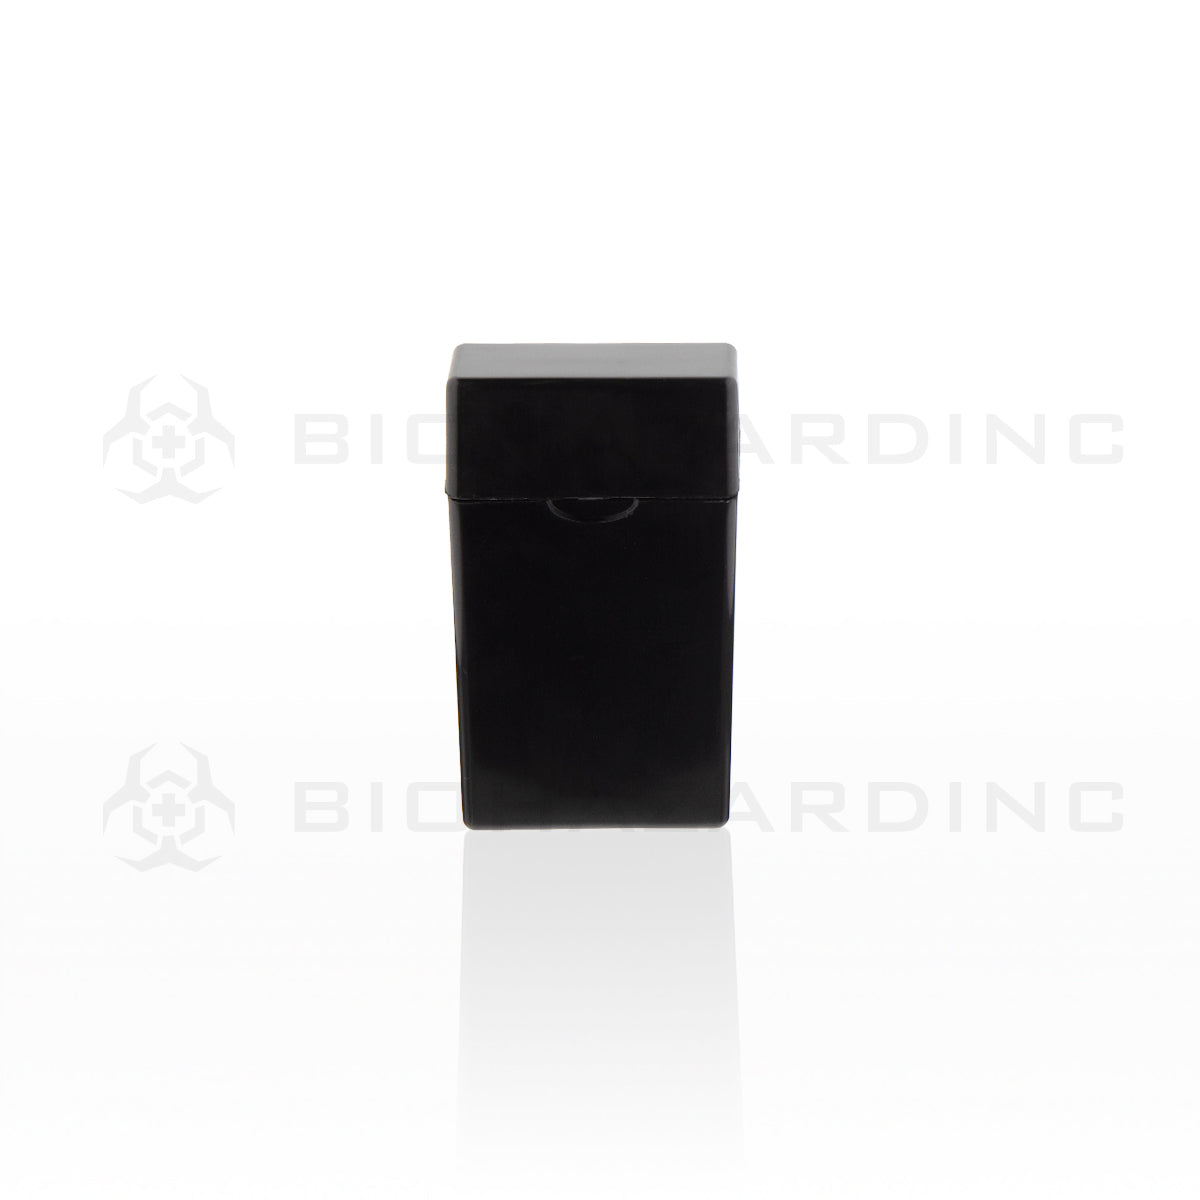 Preroll Cases | 85mm Portable Joint Boxes | 100 Count - Black Pre Roll Case Biohazard Inc   